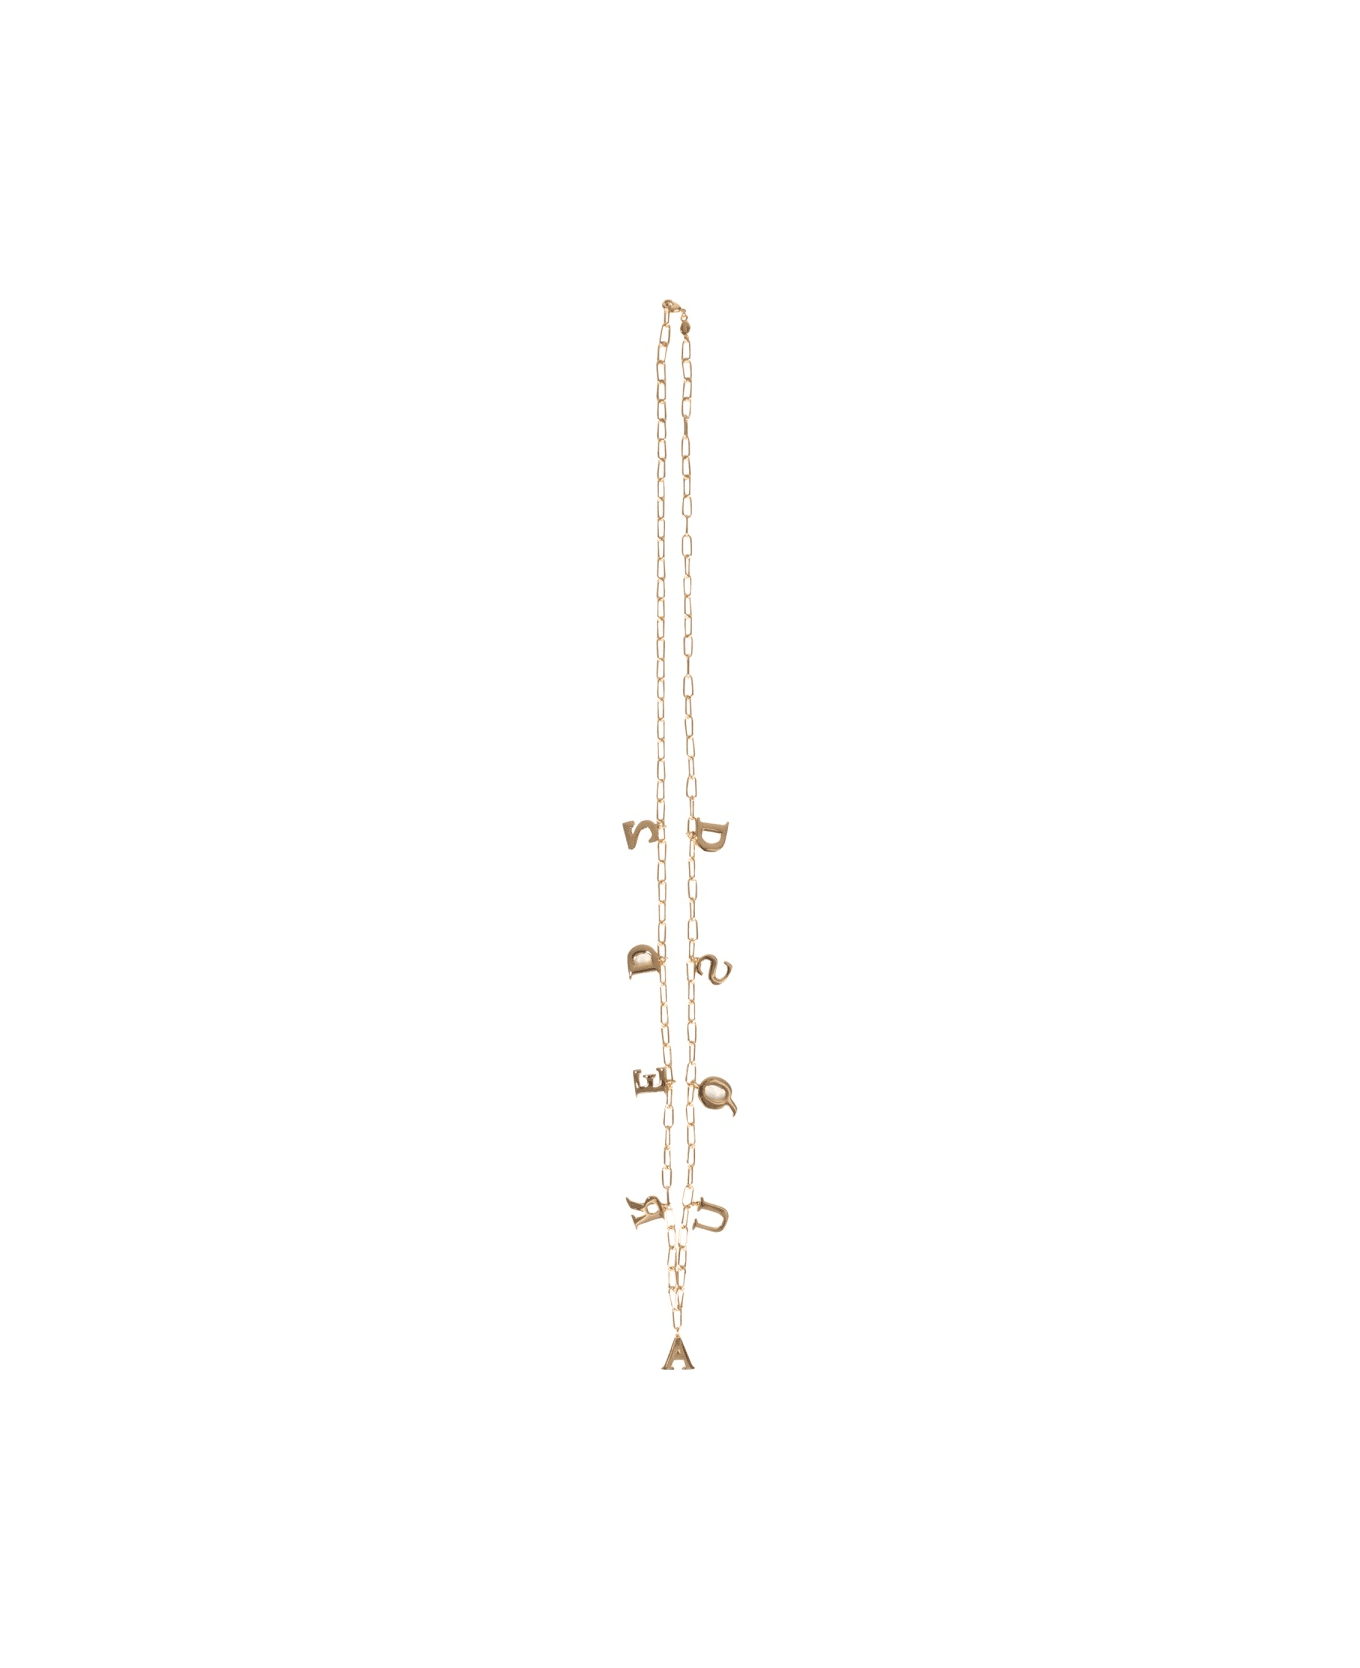 Dsquared2 Charmy Necklace - GOLD